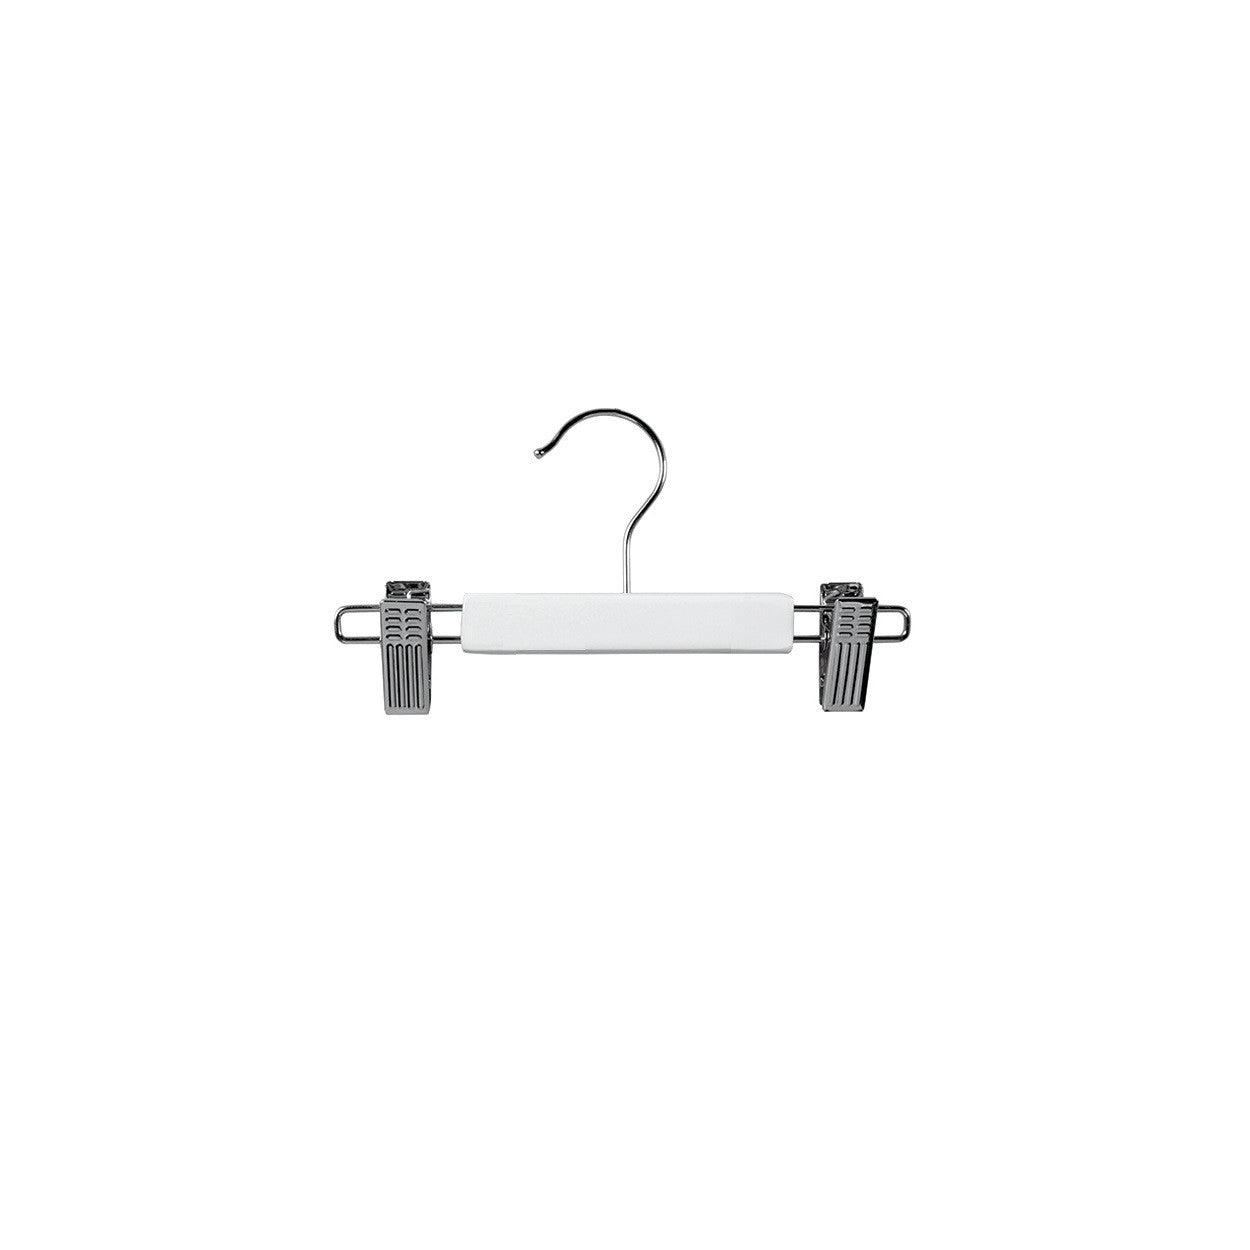 23cm Baby Size White Wooden Pant Hanger With Clips (Sold in 25/50/100) - Hangersforless